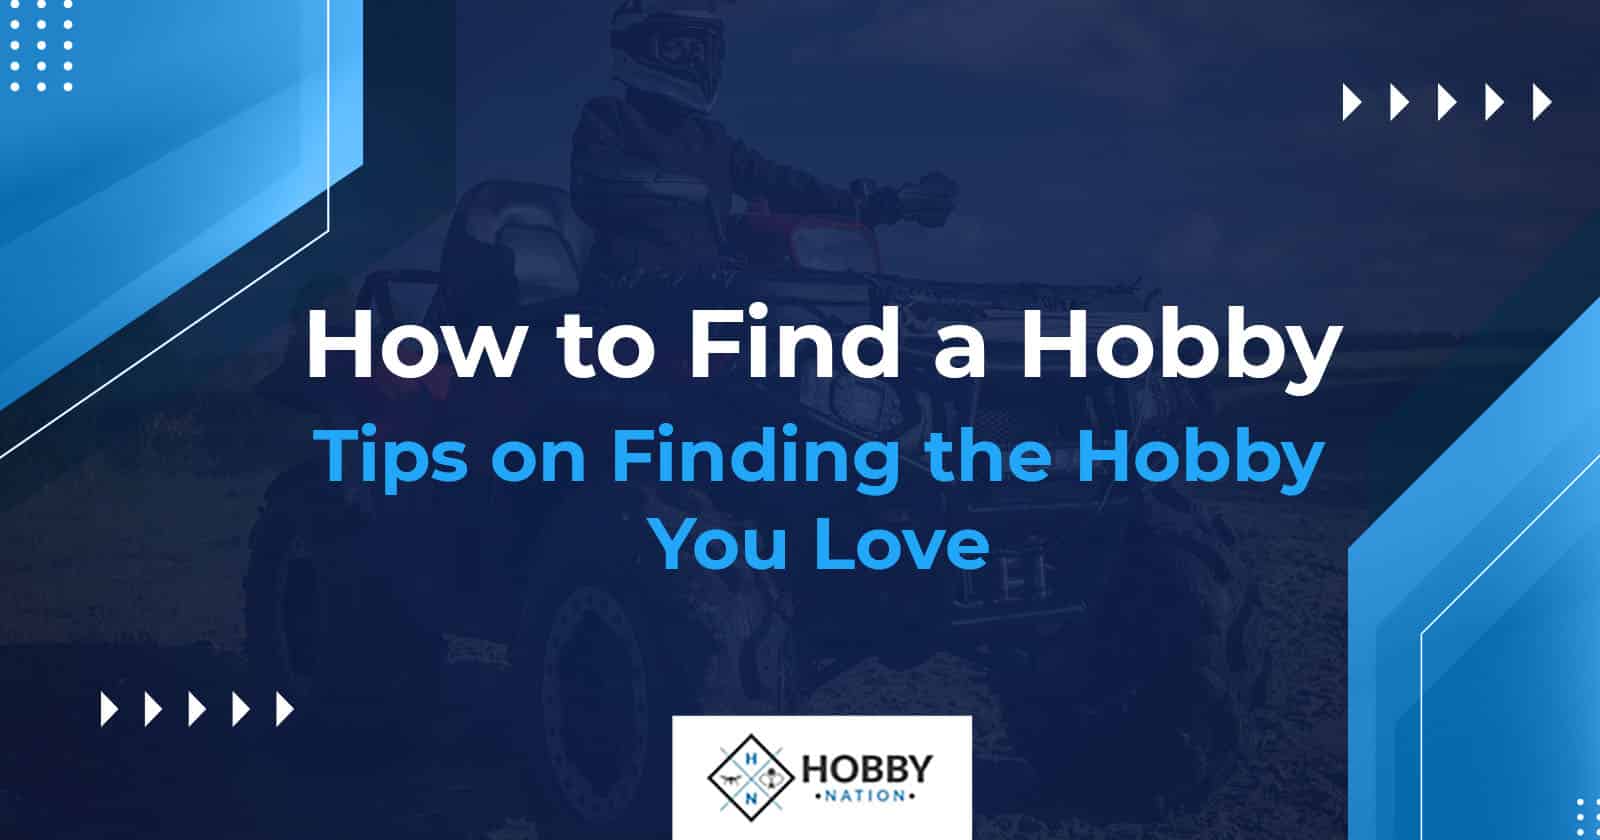 How to Find a Hobby – Tips on Finding the Hobby You Love